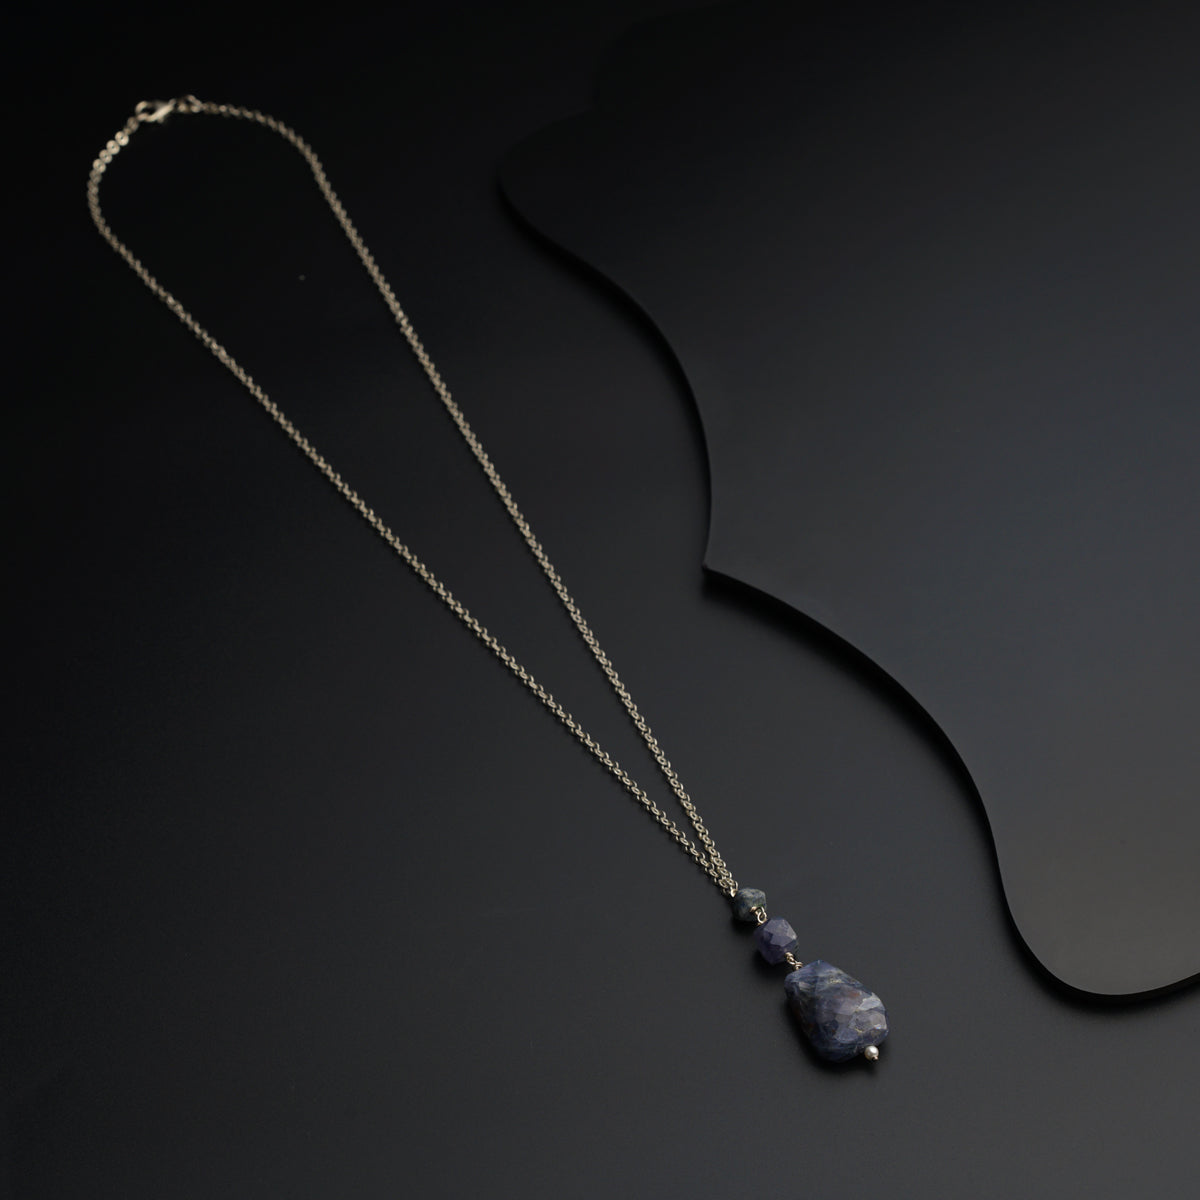 a necklace with a stone on a black background